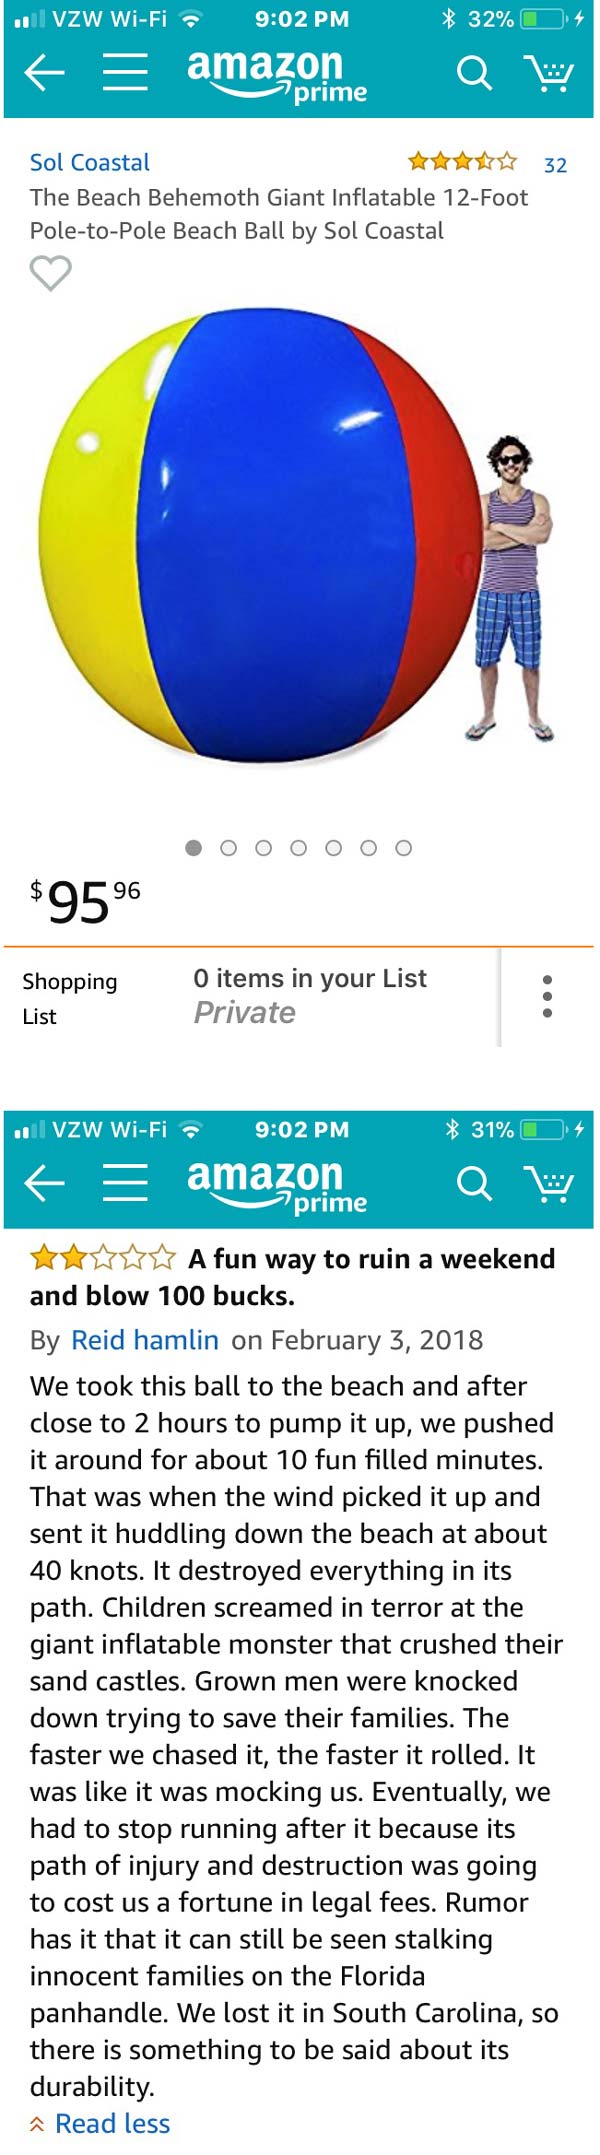 This Amazon review